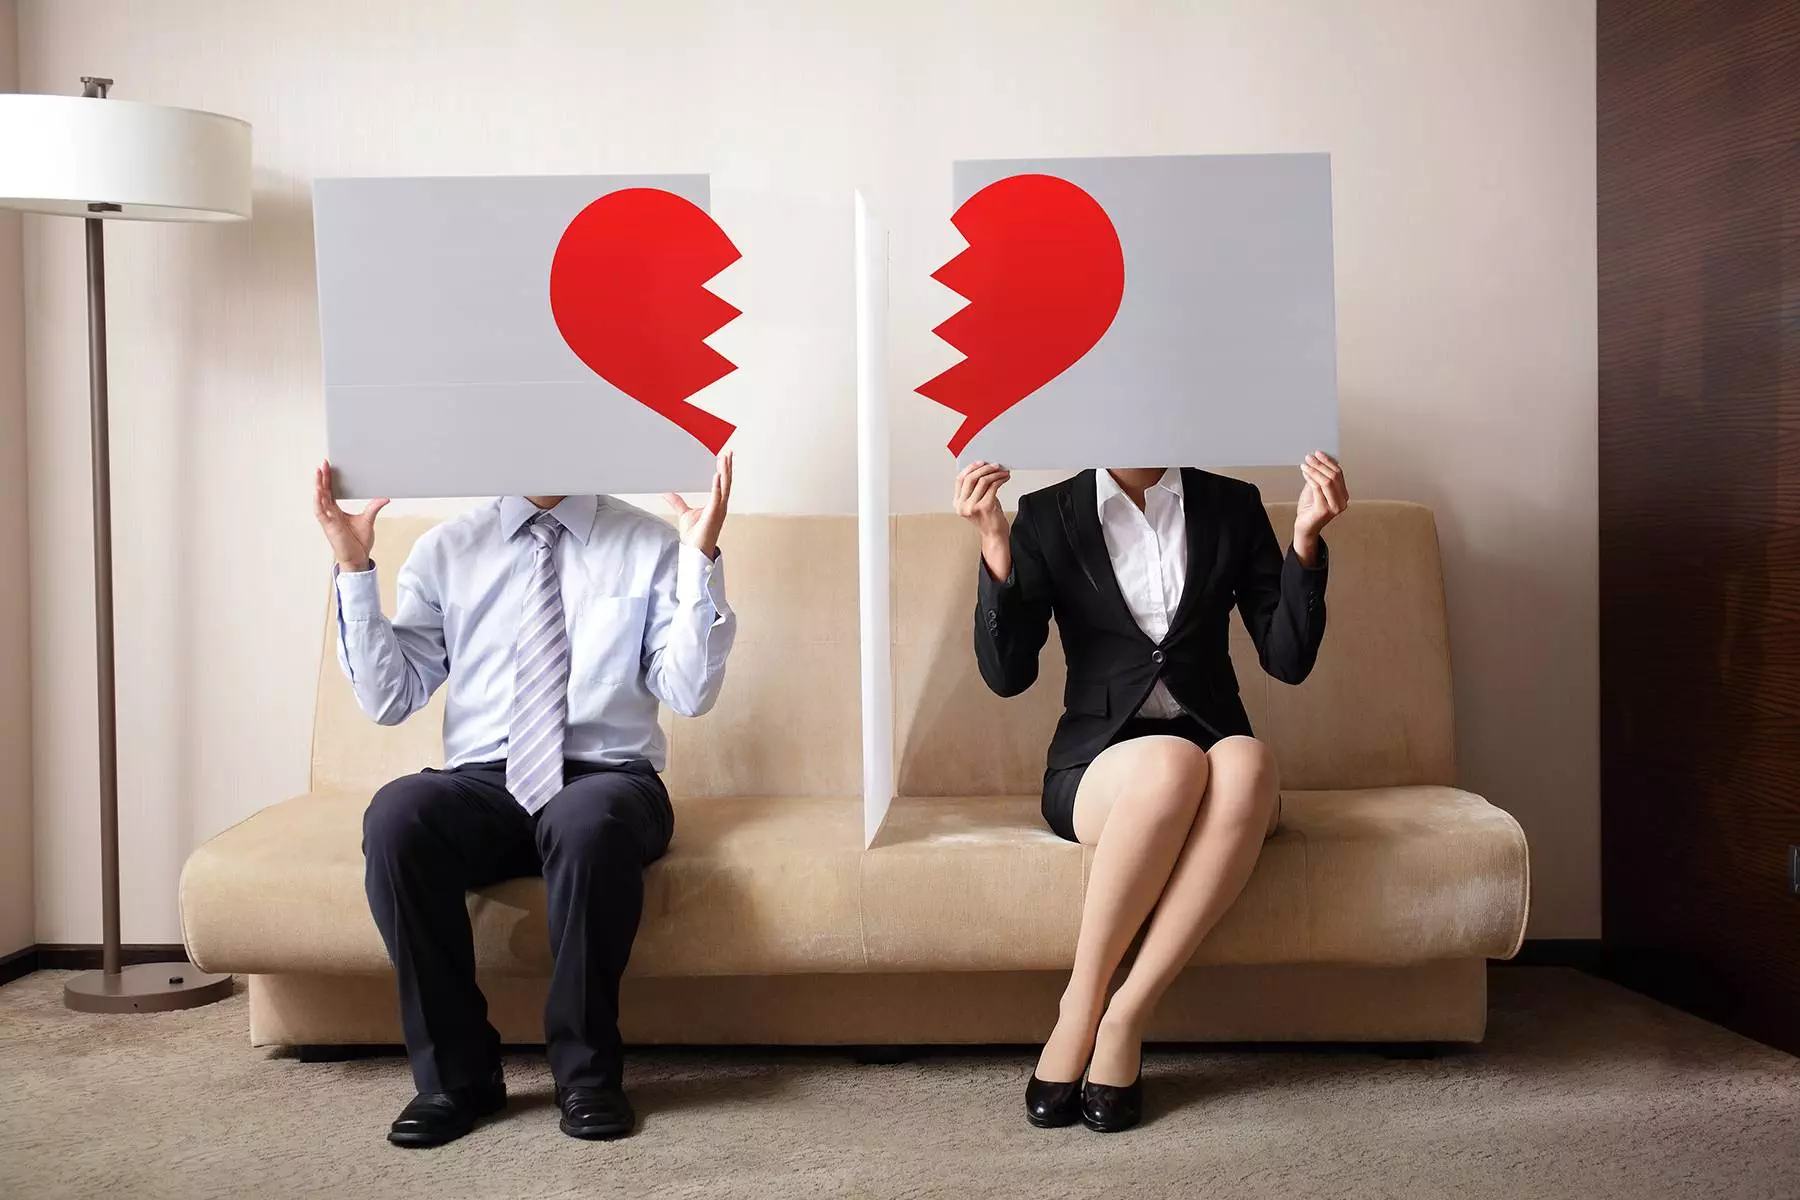 THE 3 TYPES OF DIVORCE IN SOUTH AFRICA